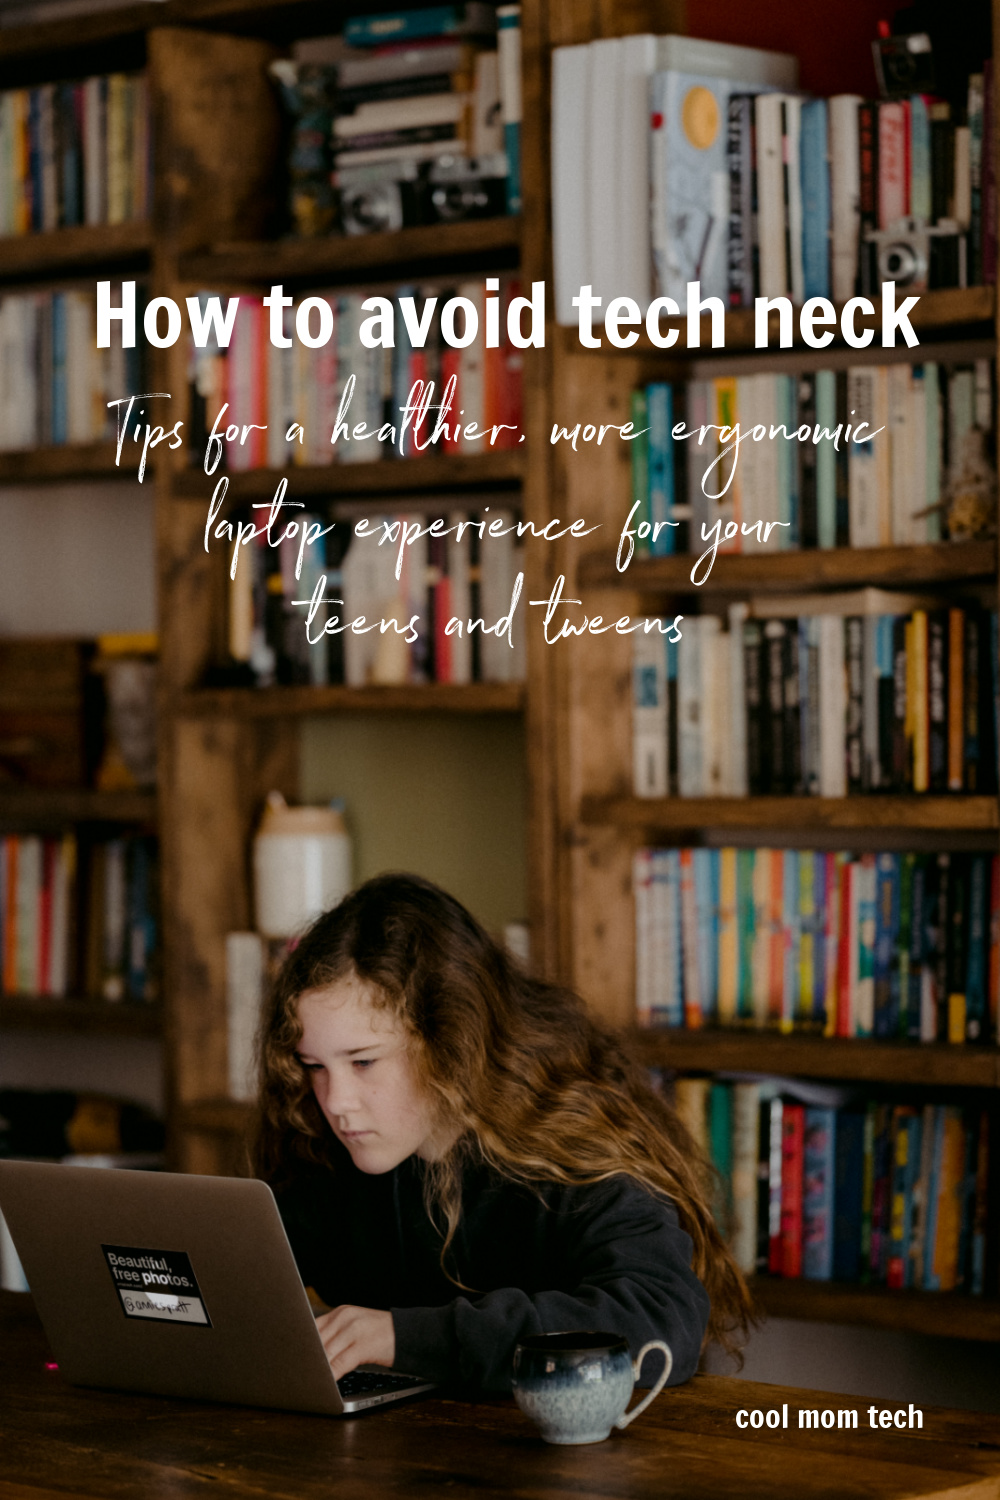 How to avoid tech neck: Tips to help give your teens a more ergonomic laptop experience